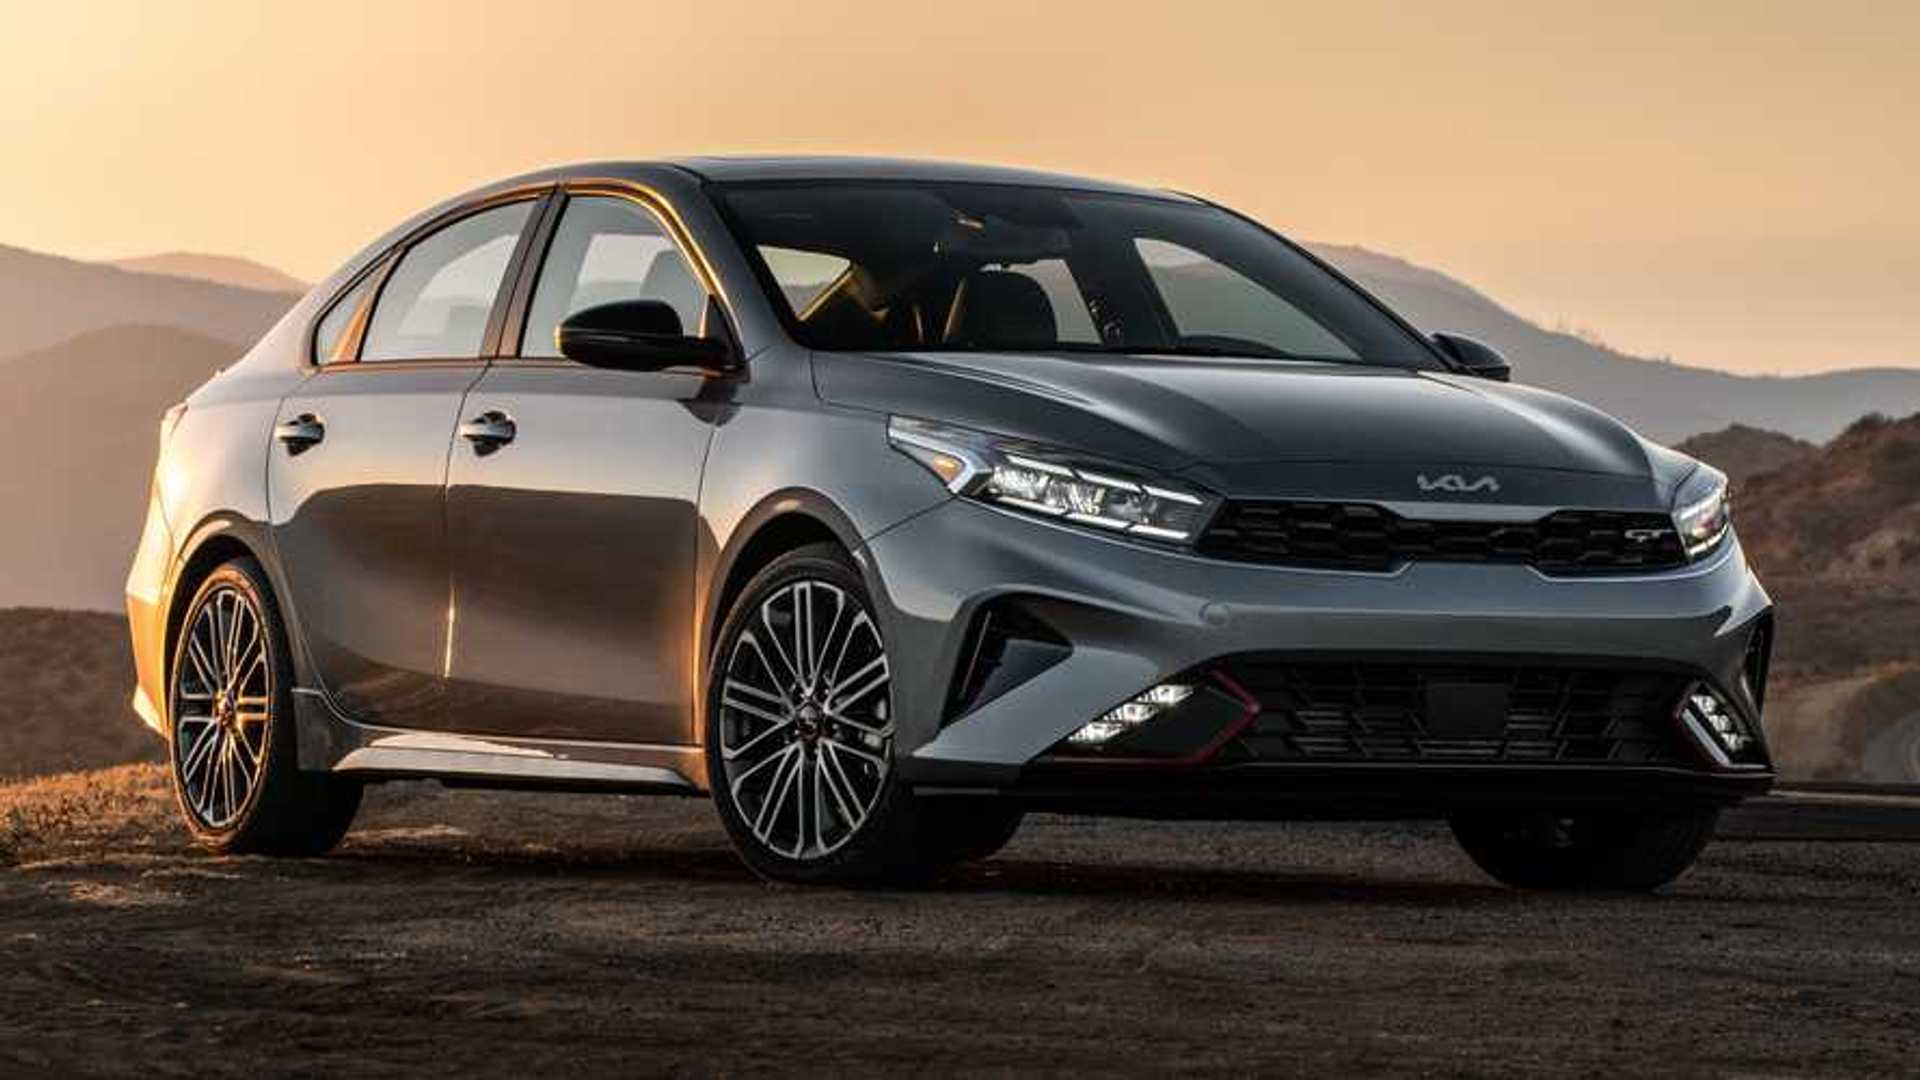 2024 Kia Forte Price Starts At 20,915, 330 More Than Last Year The